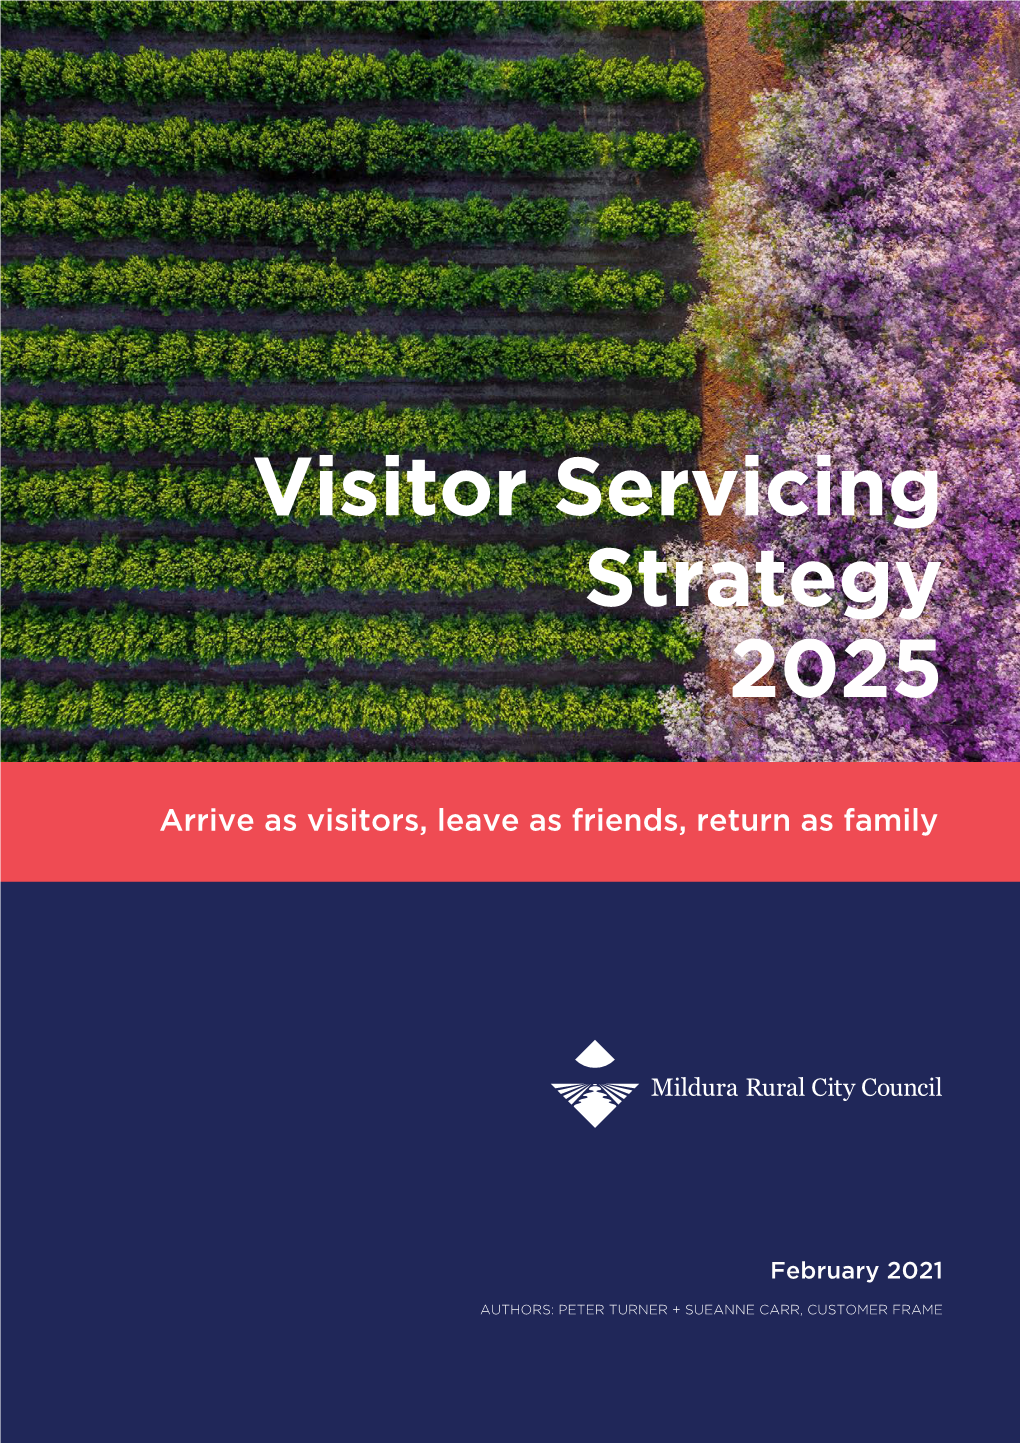 Visitor Servicing Strategy 2025